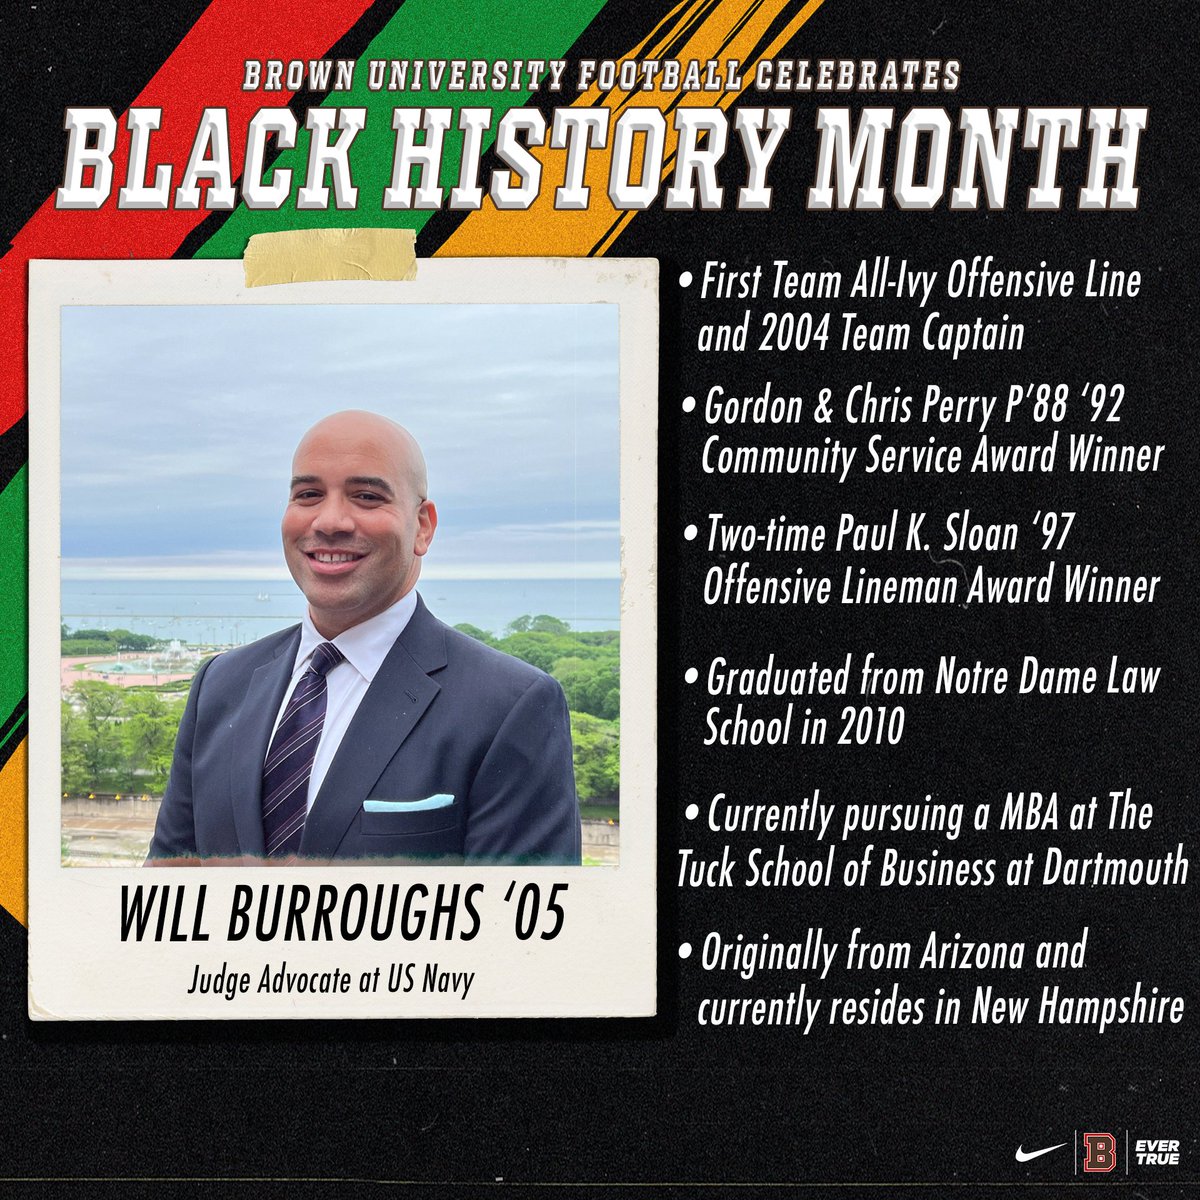 Today we recognize Will Burroughs '05 ( @WillCBB ). Will was team captain, First-Team All-Ivy and two-time recipient of Paul K. Sloan '97 Offensive Lineman of the Year award. He currently serves as a Judge Advocate in the @USNavy #EverTrue #BlackHistoryMonth